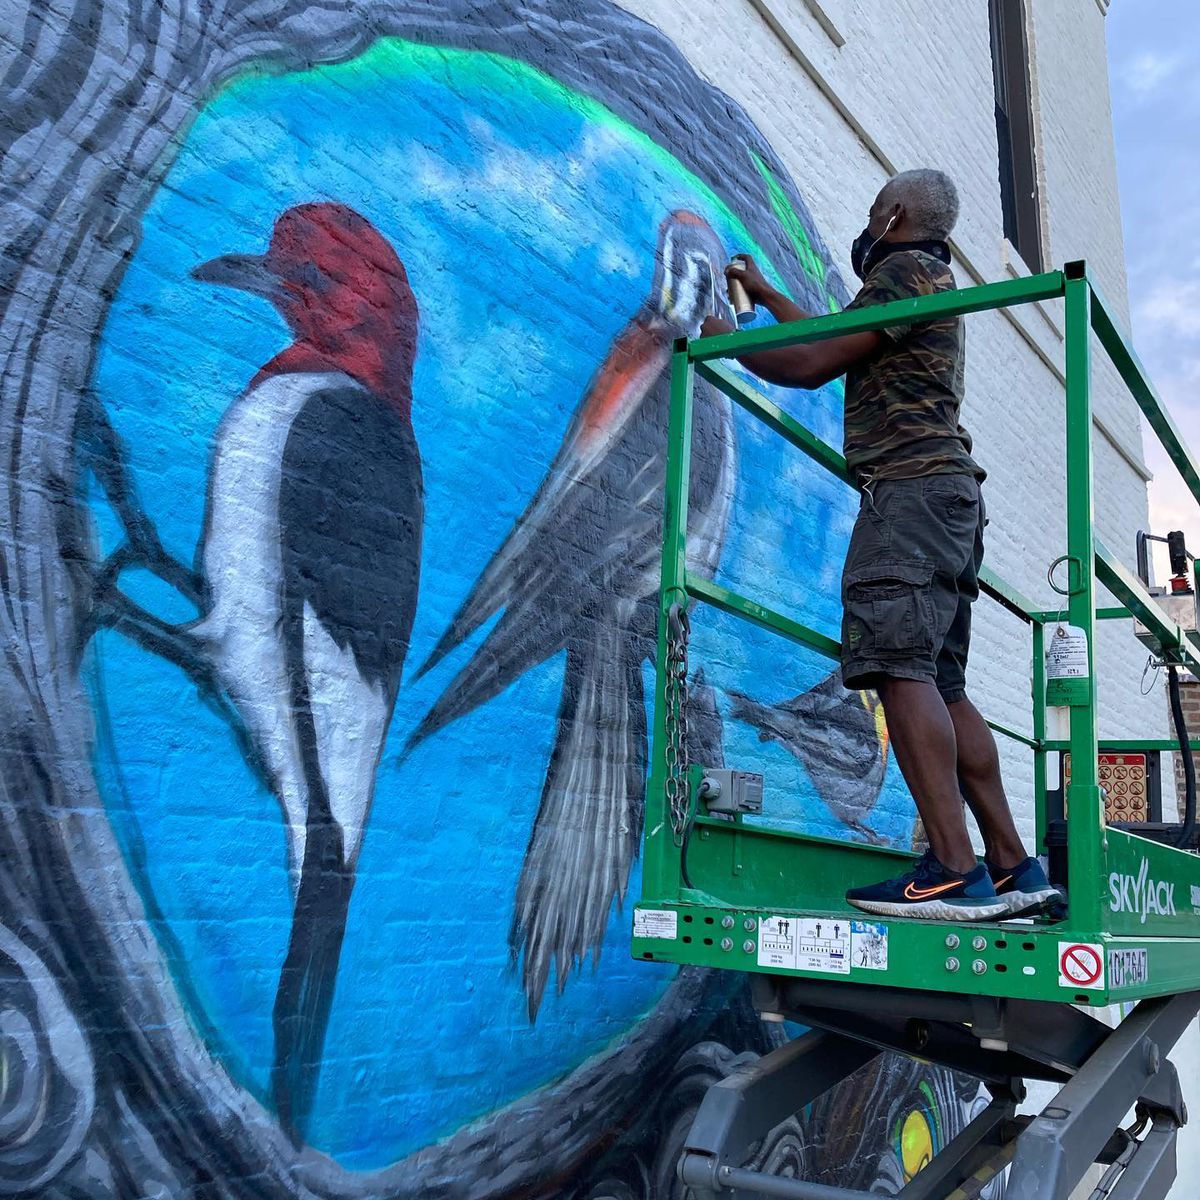 Tyrue “Slang” Jones, working from a scissor lift, painting the mural “Birds of Concern” at 1901 Central St. in Evanston. He finished the mural Sept. 26.